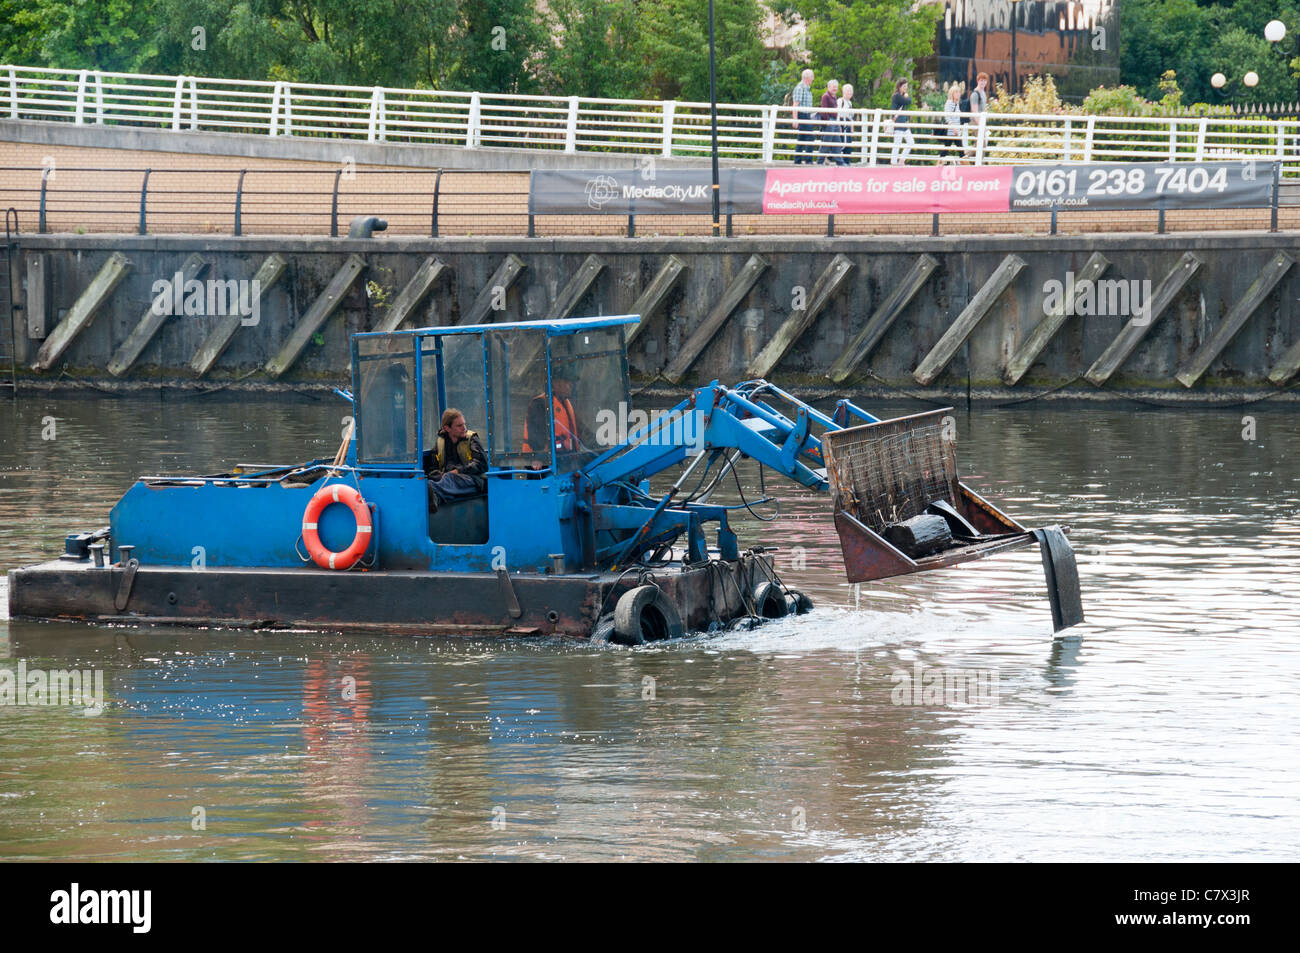 Bucket loader on a barge, clearing floating debris on the Manchester Ship Canal, Salford Quays, Manchester, England, UK Stock Photo